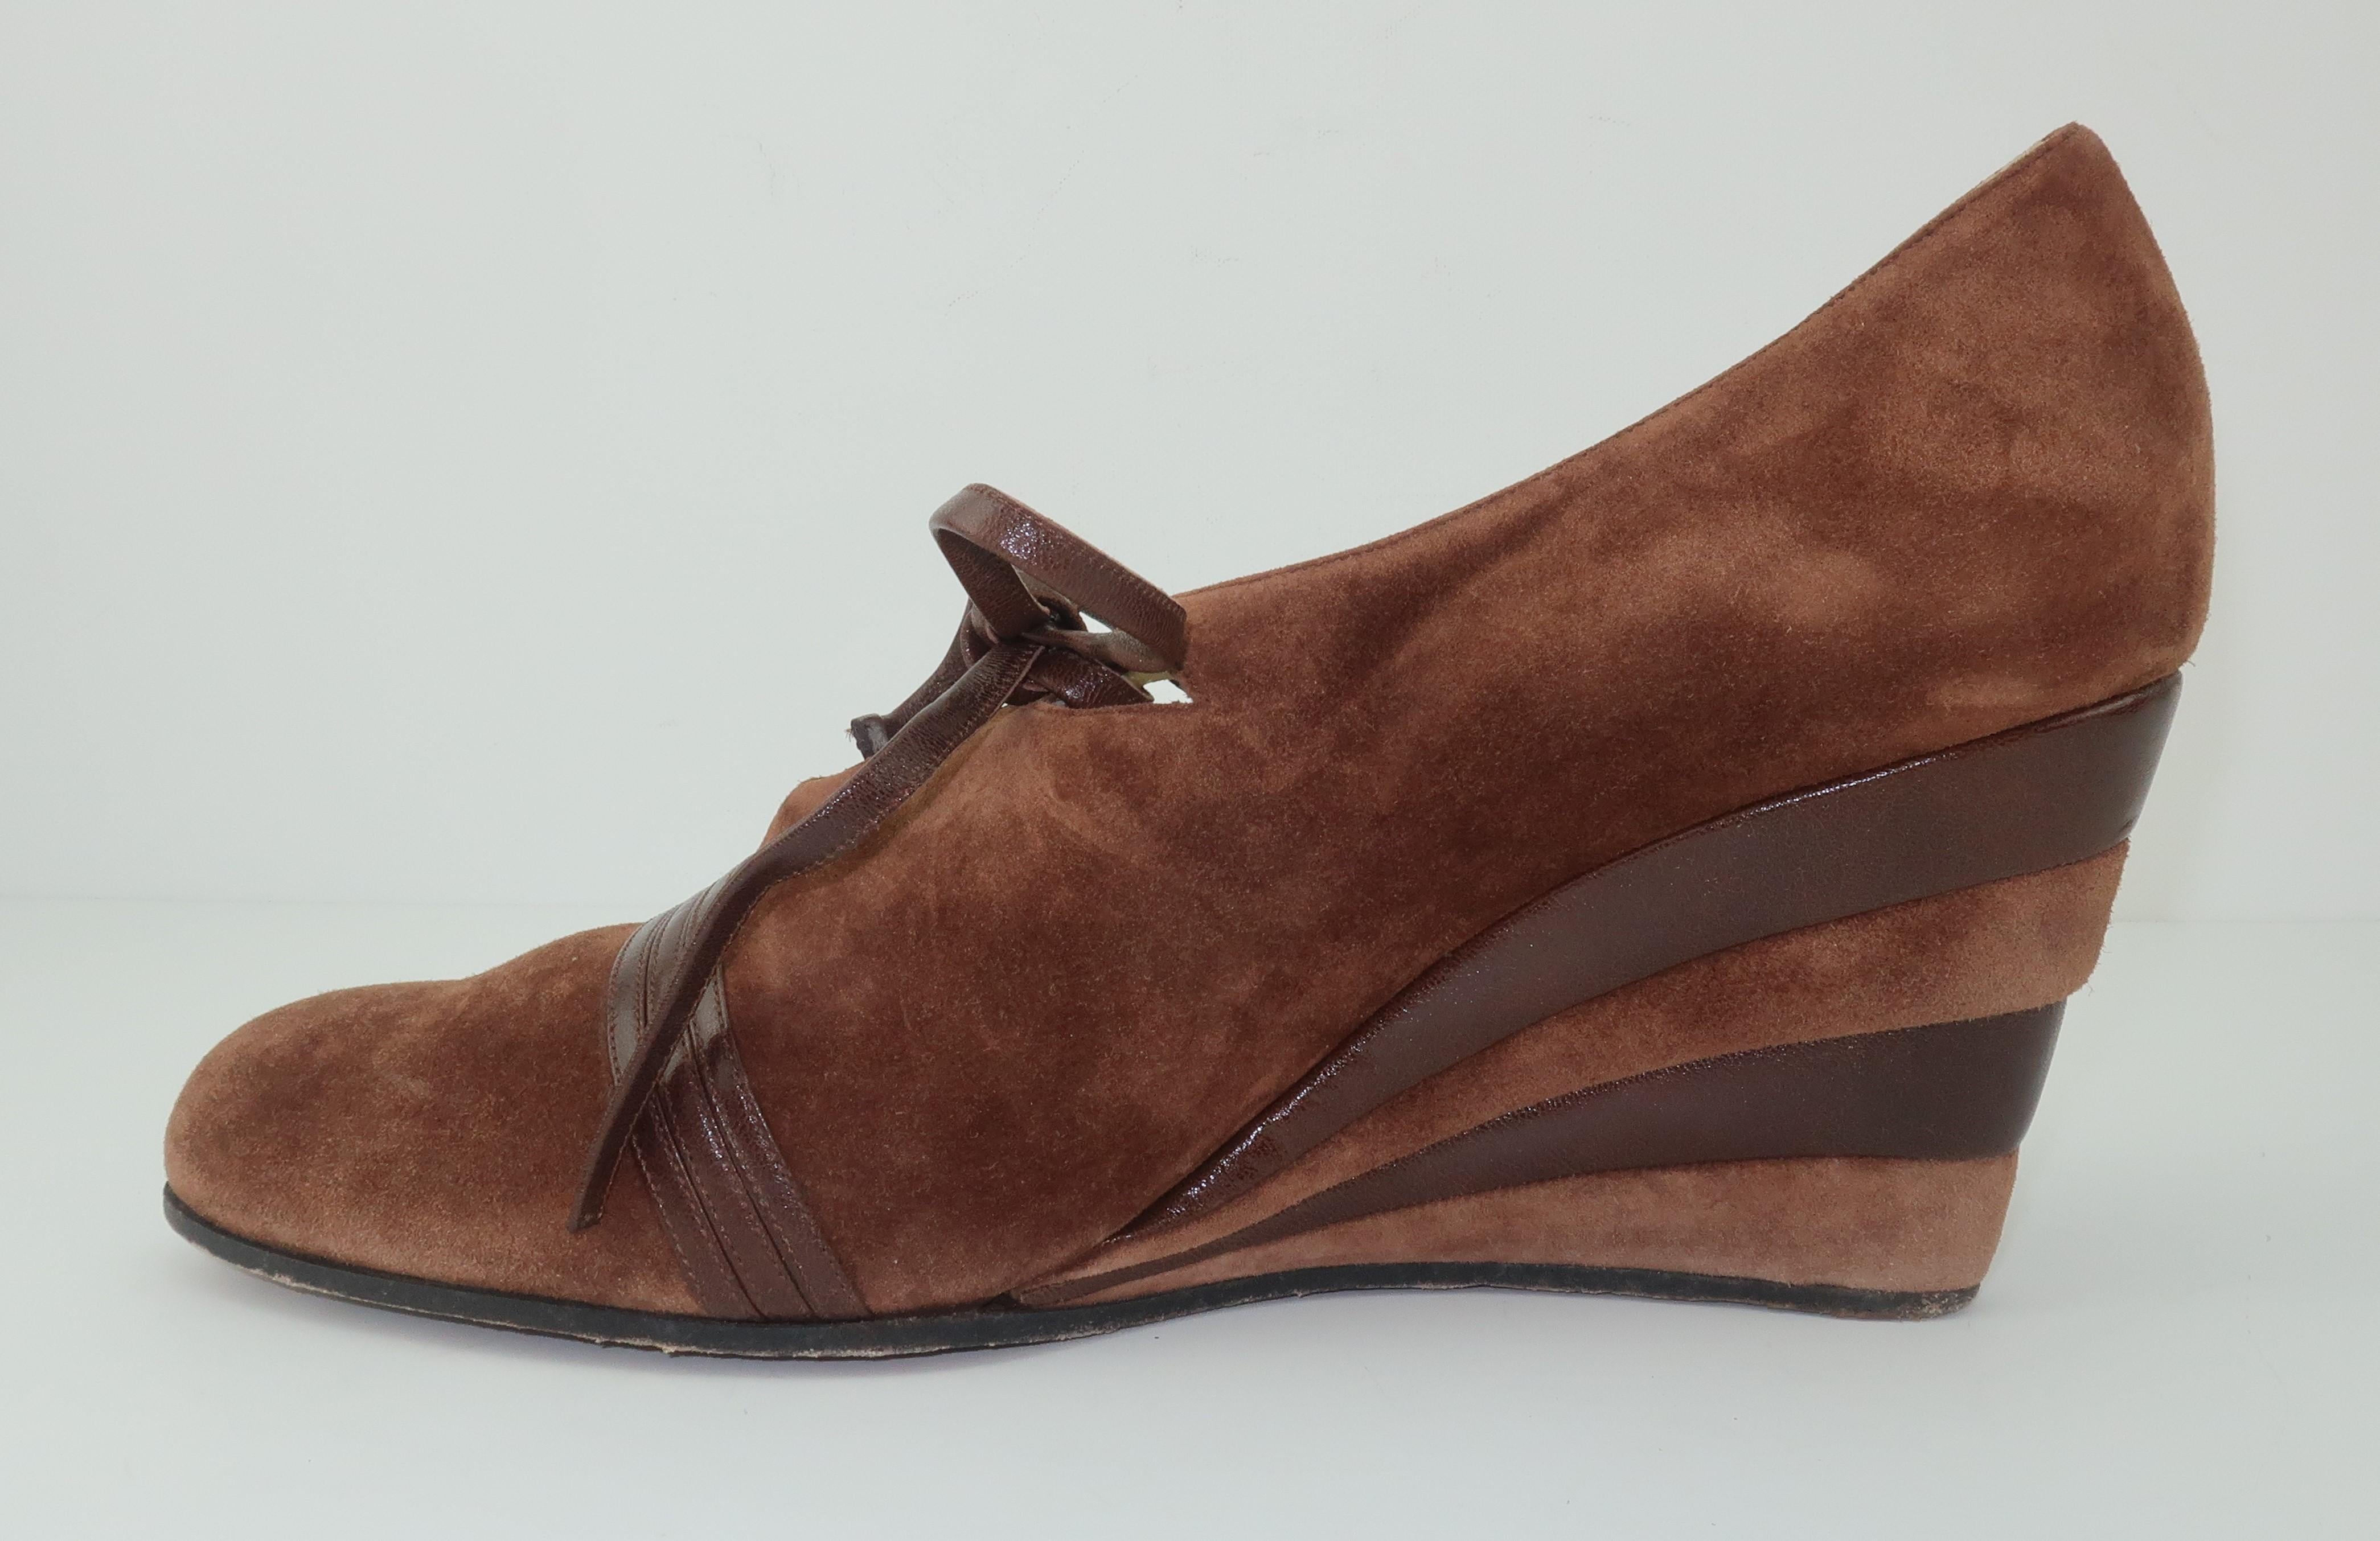 Women's Ferragamo Creations Limited Edition 1940's Style Brown Suede Wedge Shoes Sz 8